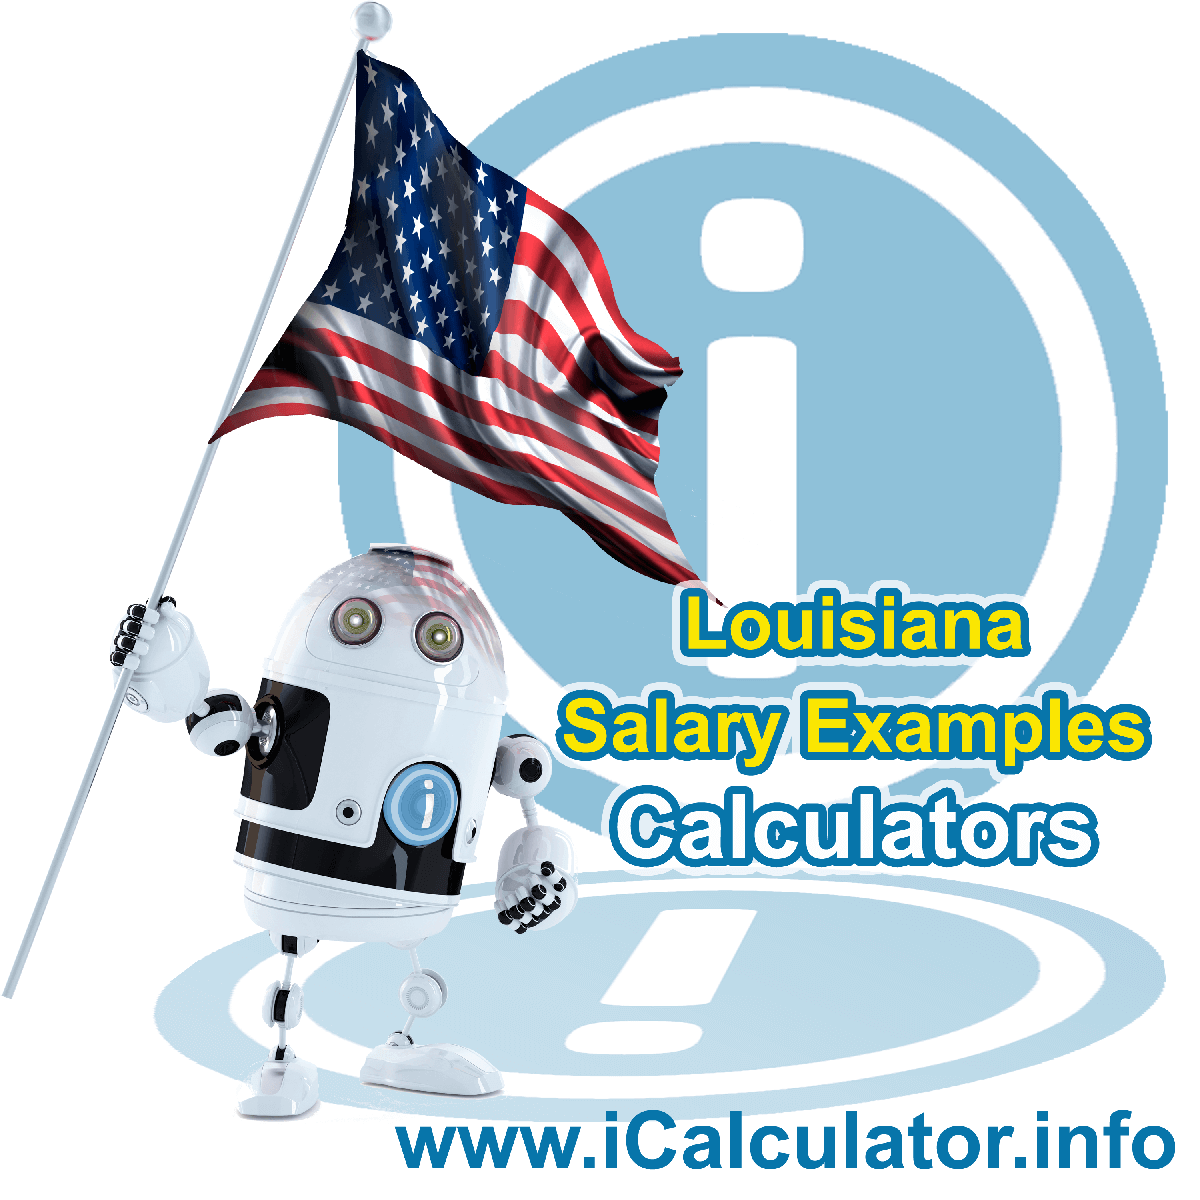 Louisiana Salary Example for $ 55,000.00 in 2023 | iCalculator™ | $ 55,000.00 salary example for employee and employer paying Louisiana State tincome taxes. Detailed salary after tax calculation including Louisiana State Tax, Federal State Tax, Medicare Deductions, Social Security, Capital Gains and other income tax and salary deductions complete with supporting Louisiana state tax tables 